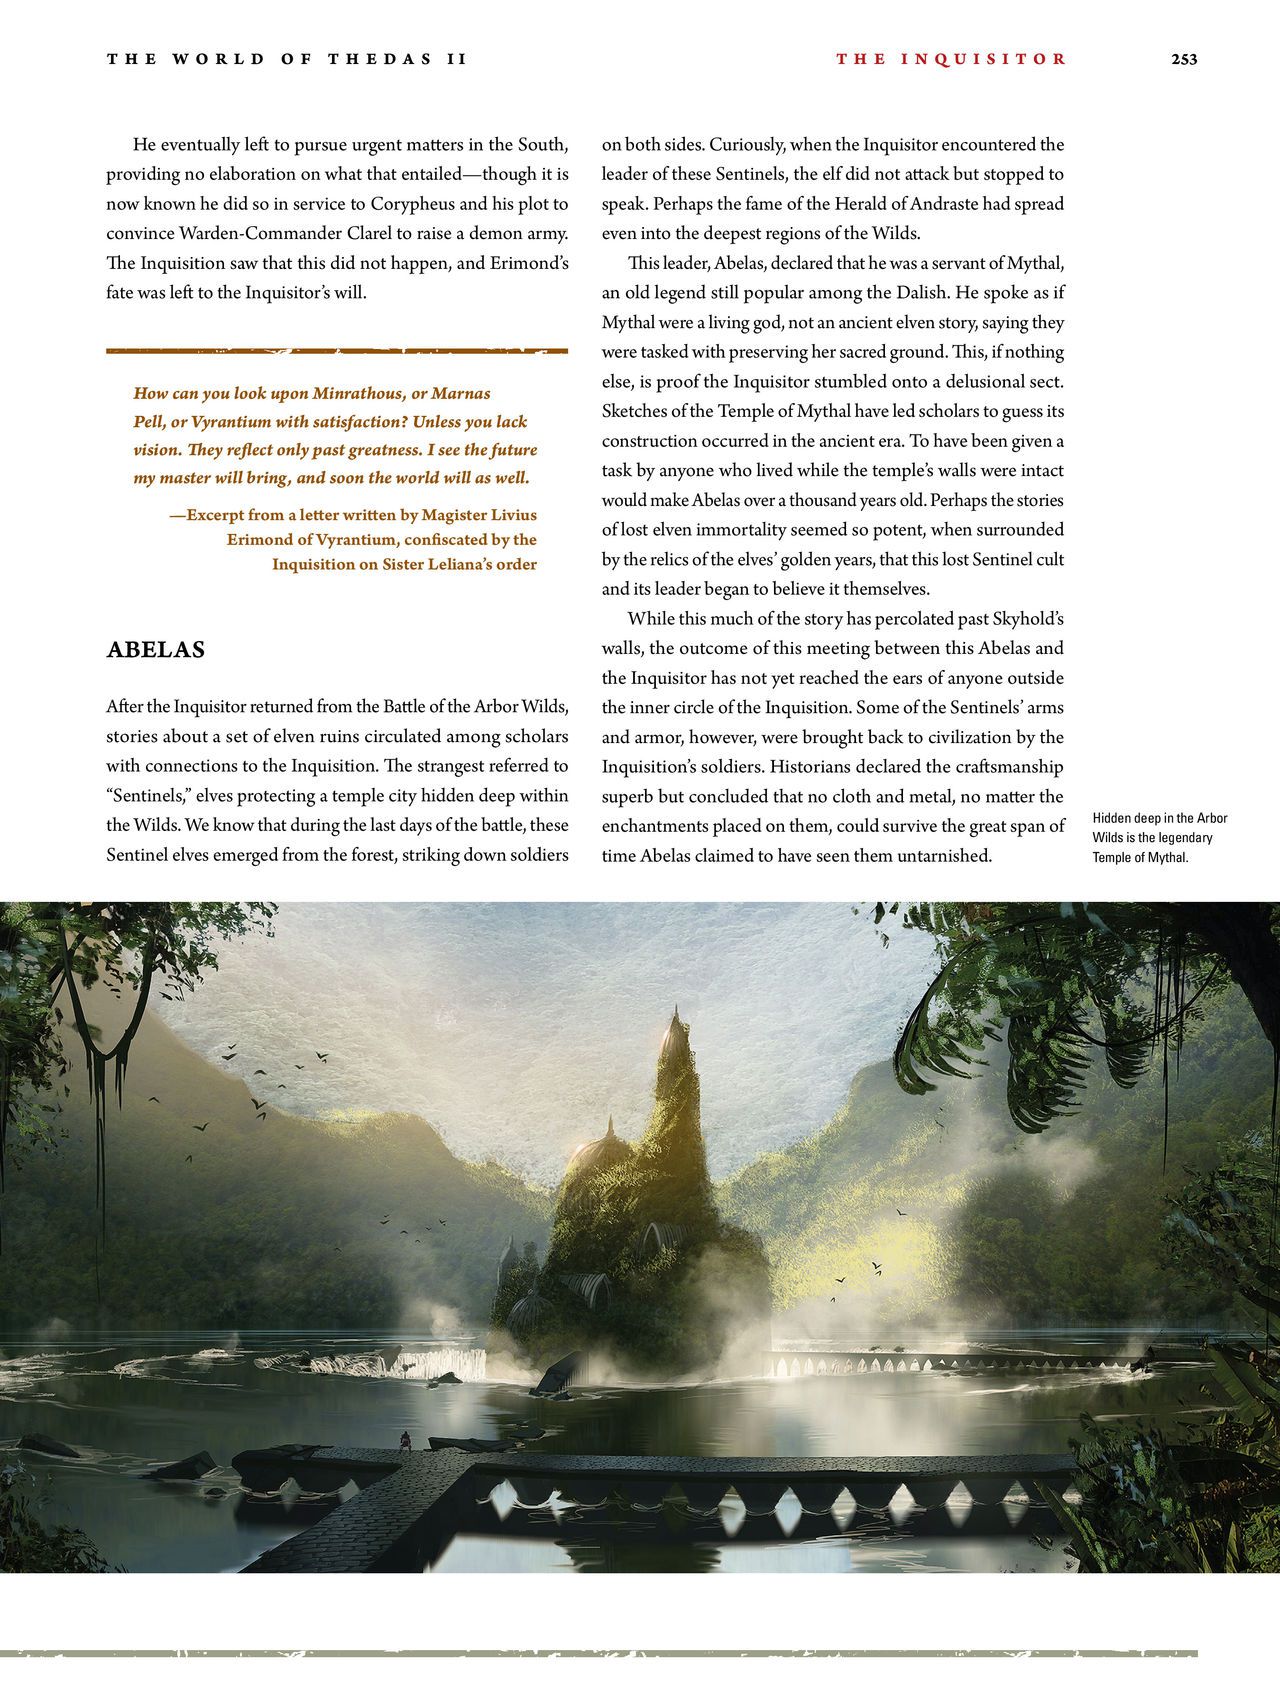 Dragon Age - The World of Thedas v02 246